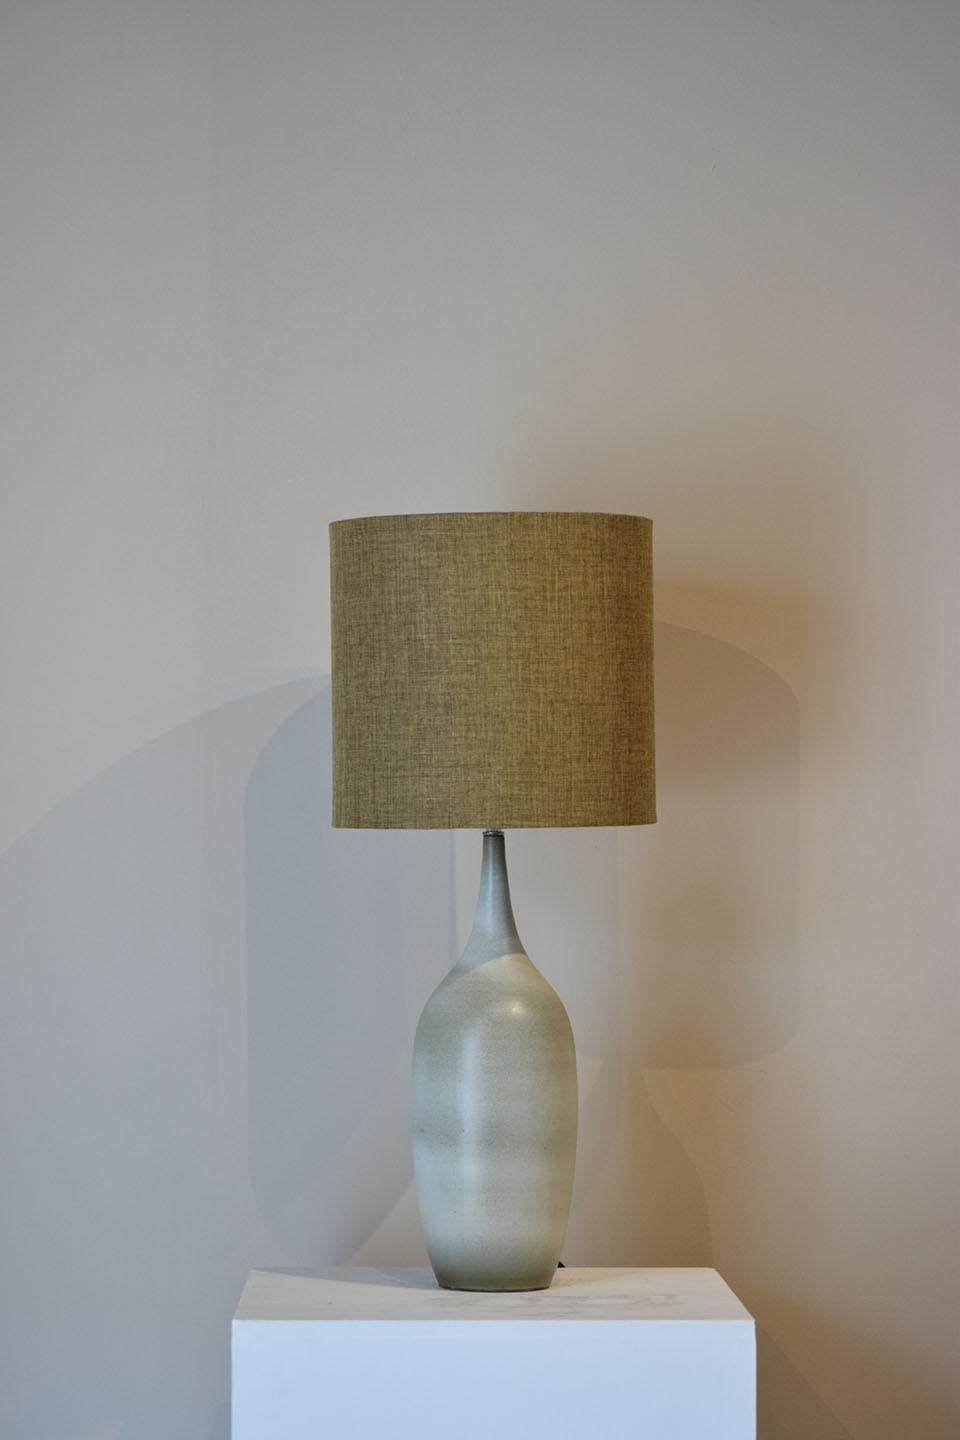 ADN Studio ceramic table lamp
Warm light, amazing color and texture. Perfect for any ambience.
Open edition.